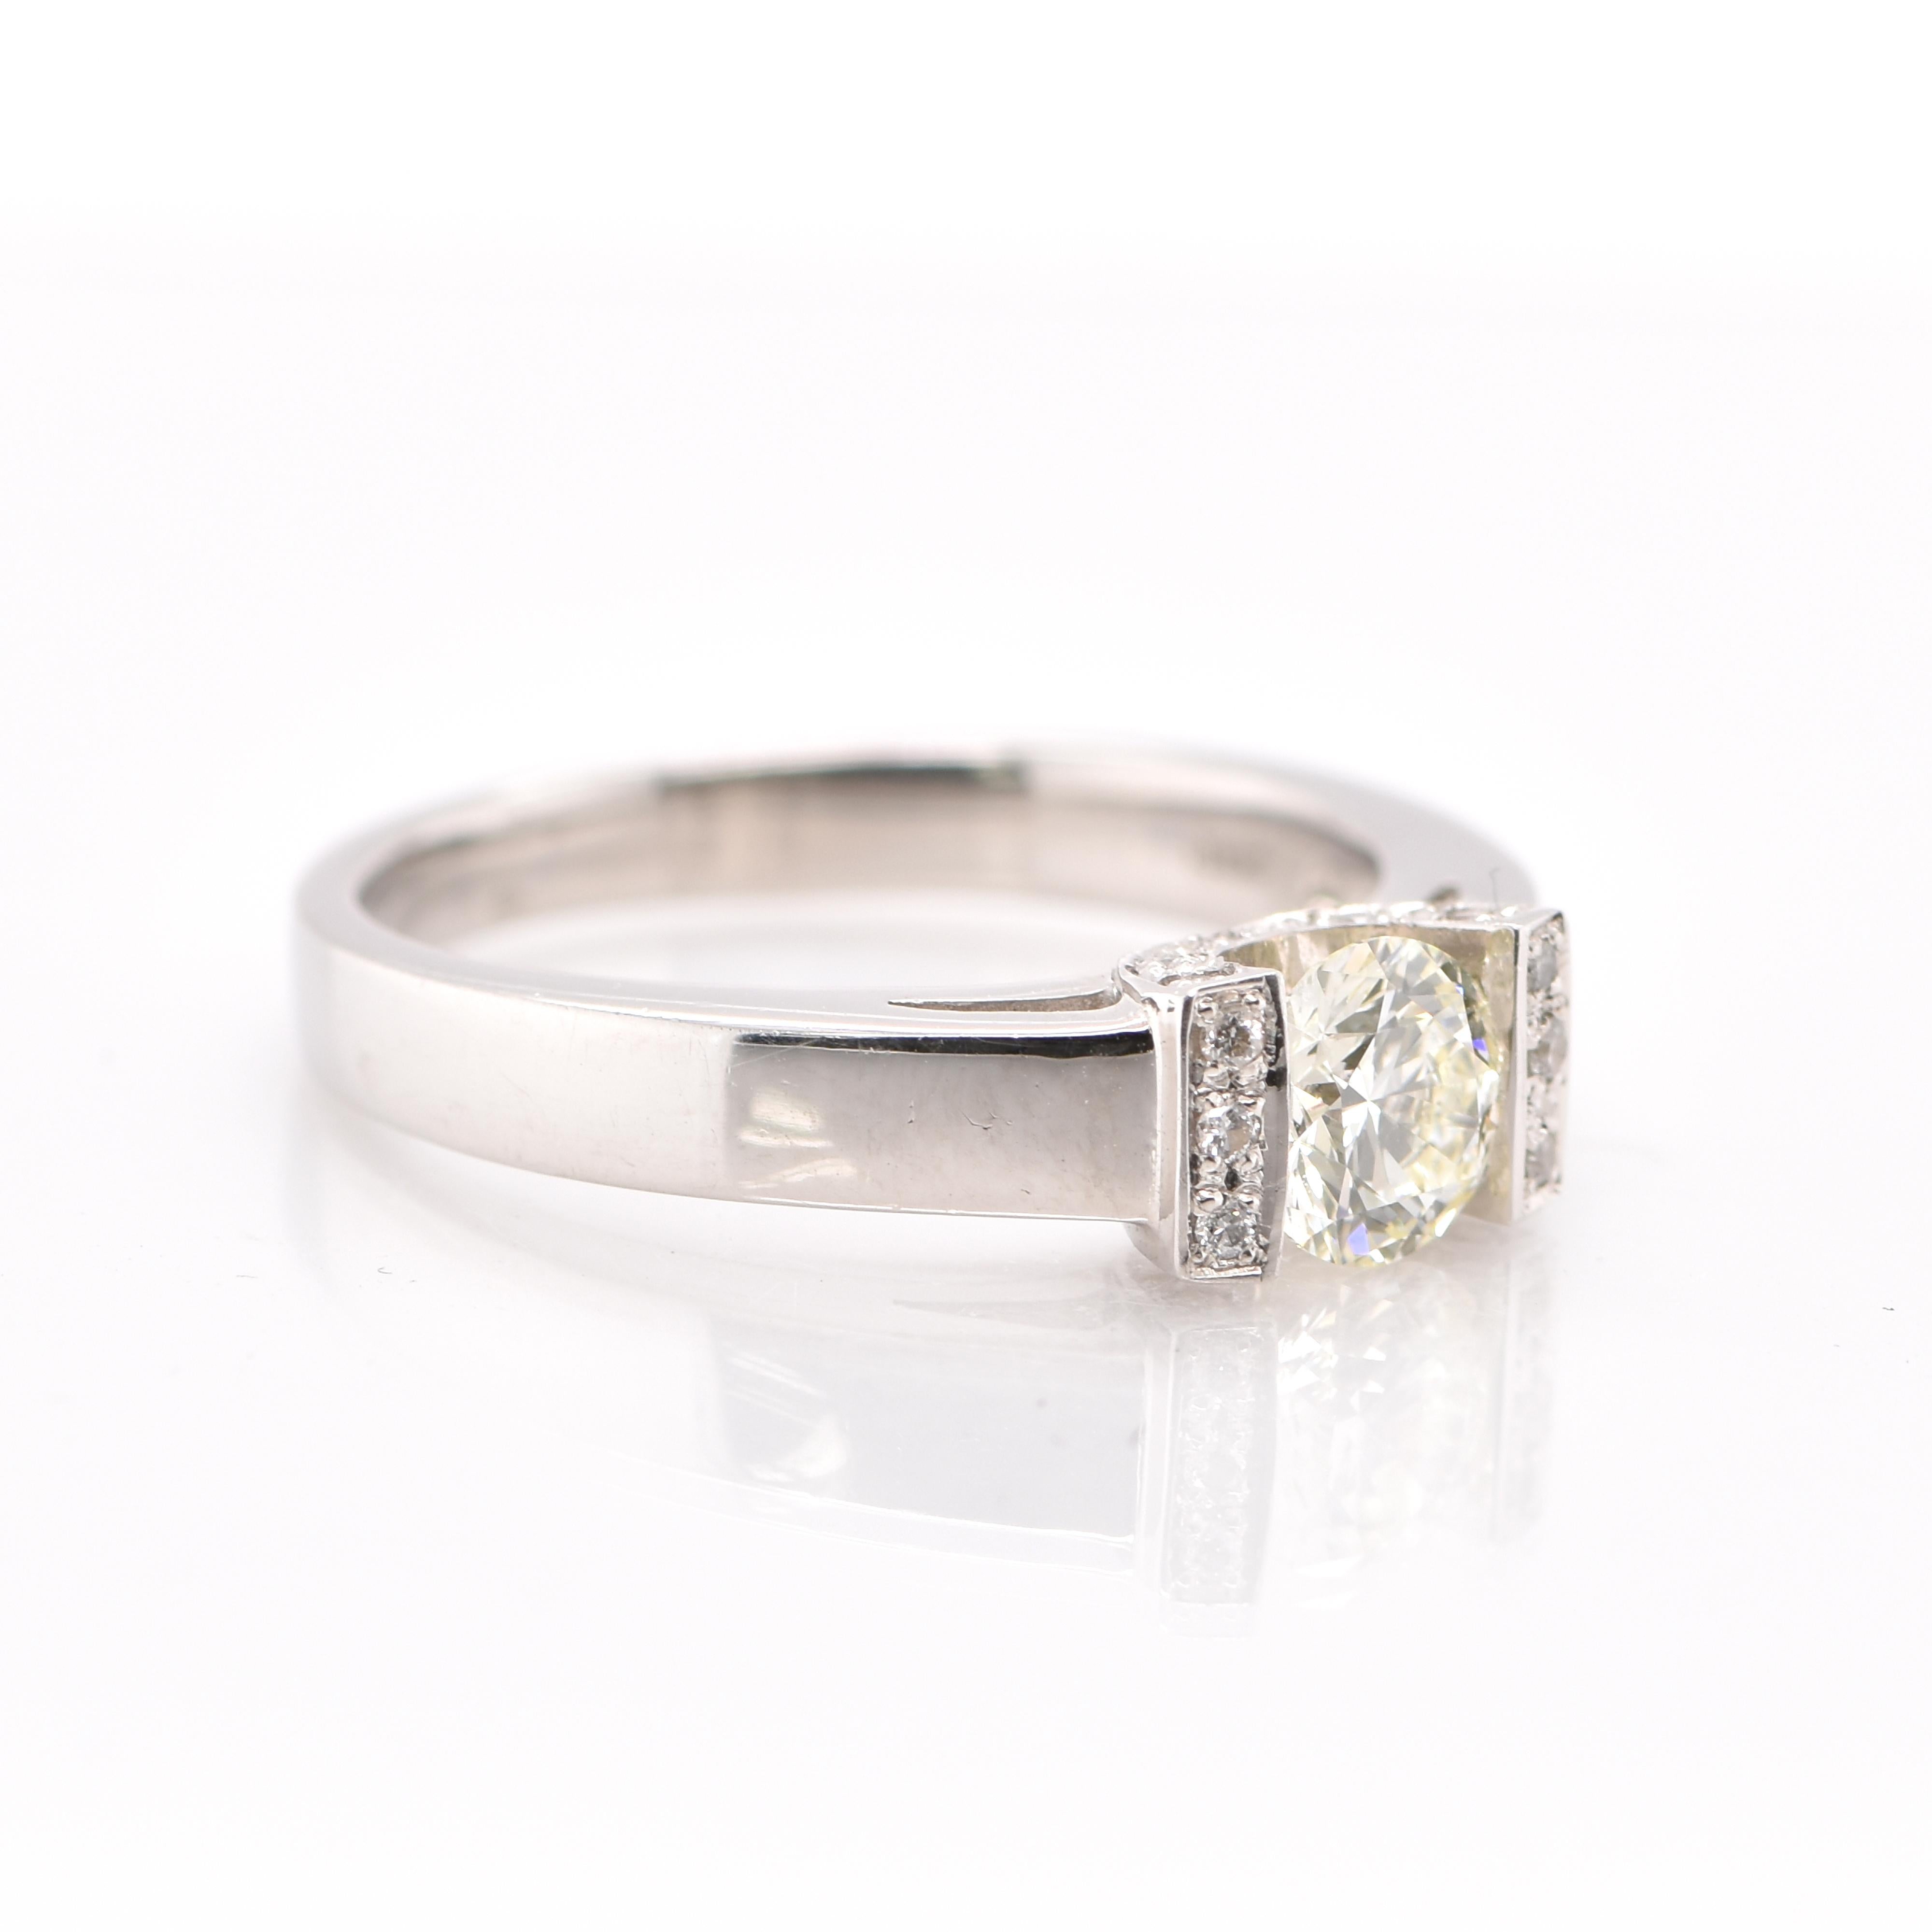 An gorgeous Engagement Ring featuring a 0.57 Carat, N VS-2 Solitaire Diamond and 0.08 Carats of accent Diamonds set in Platinum. Diamonds have been adorned and cherished throughout human history and date back to thousands of years. They are rated as